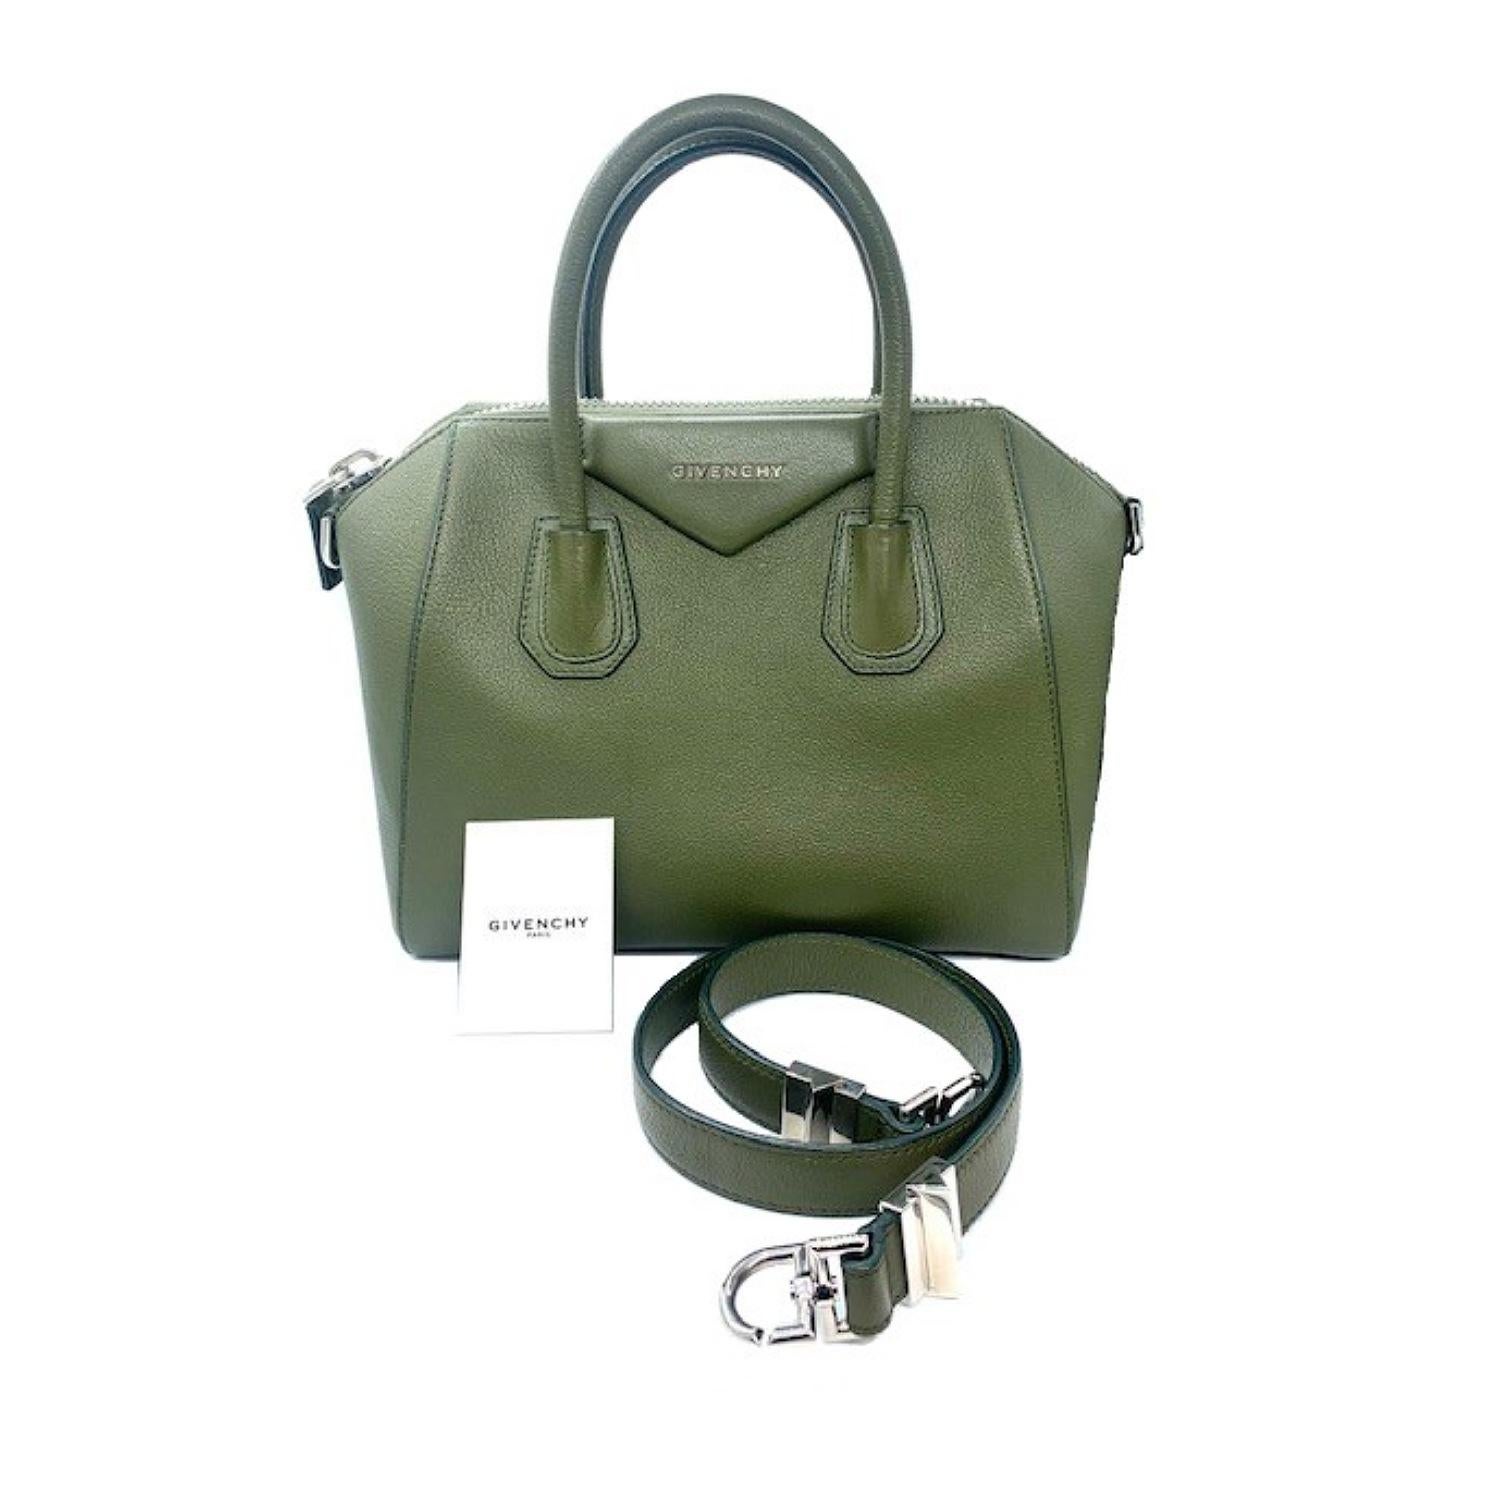 This stylish satchel is crafted of richly textured goatskin leather in olive green. The bag features sturdy rolled leather top handles, a shoulder strap with silver clasps and extended sides. The top opens with a zipper to a black fabric interior